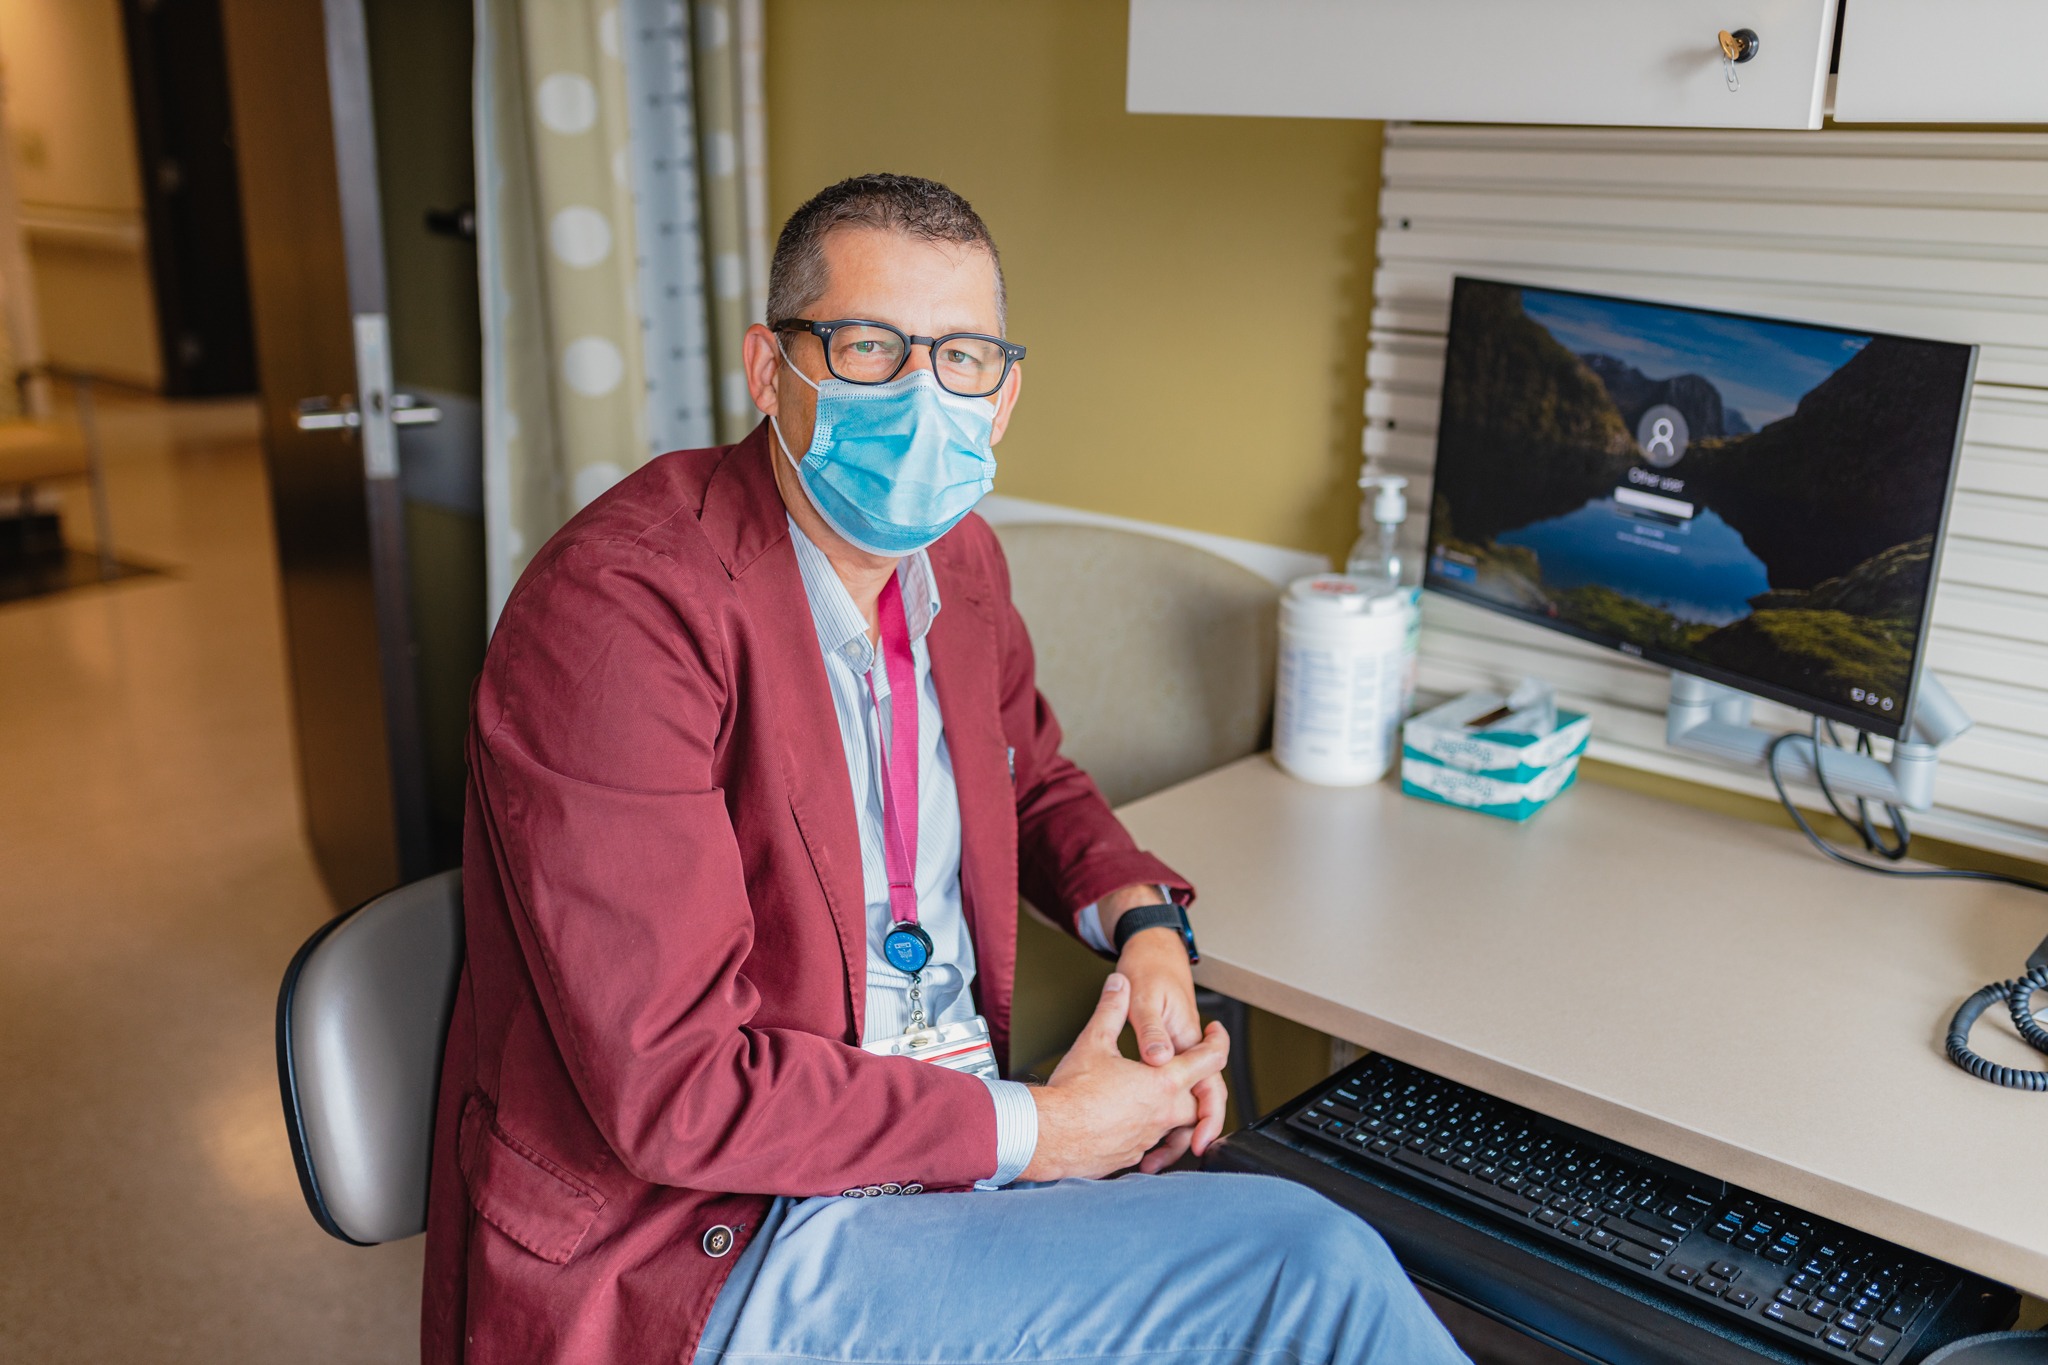 Dr. Cyr at his desk where he has virtual appointments with his patients